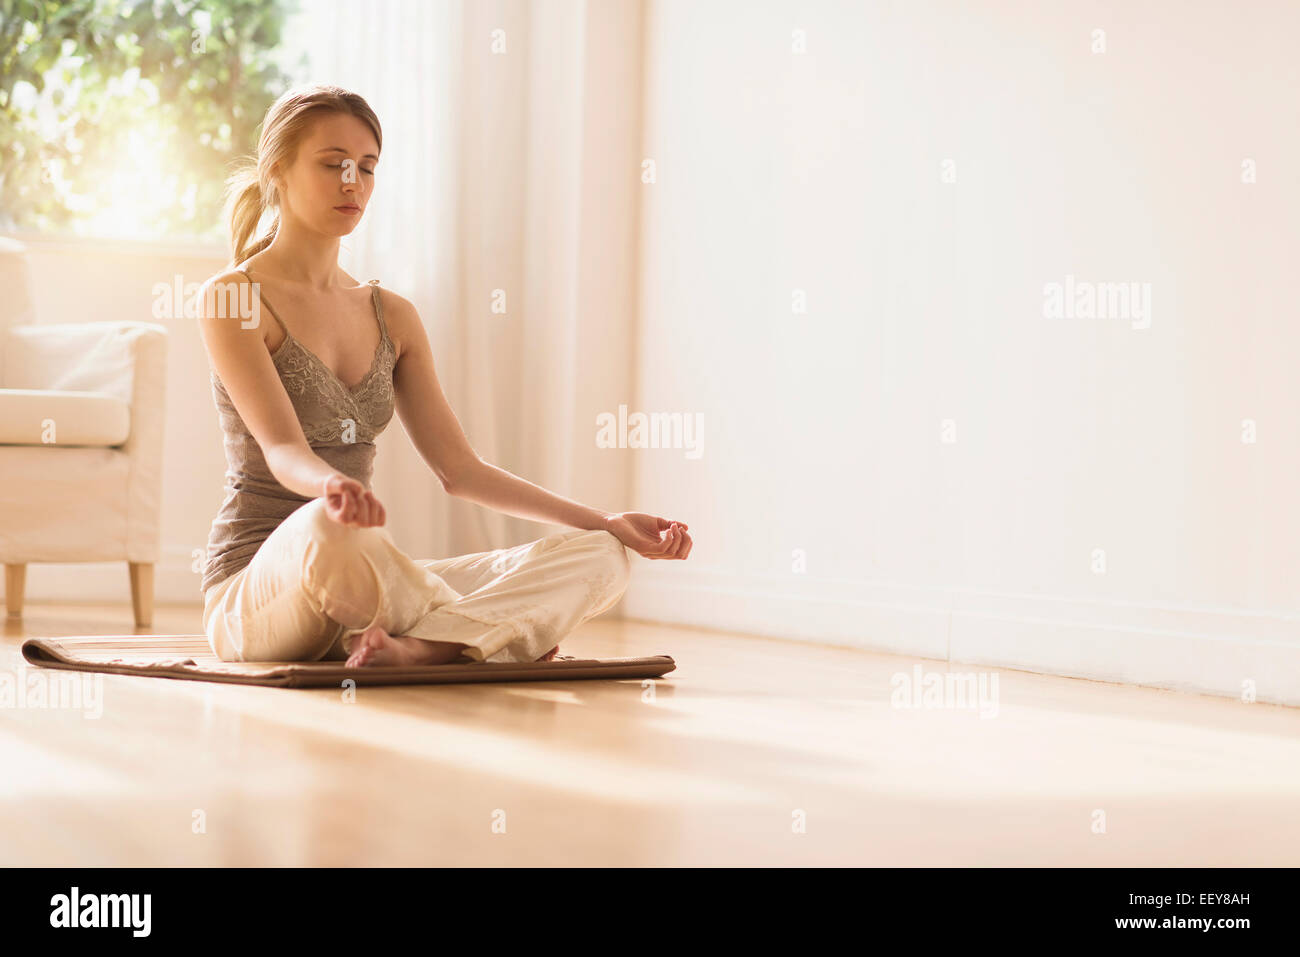 Young woman practicing yoga Stock Photo